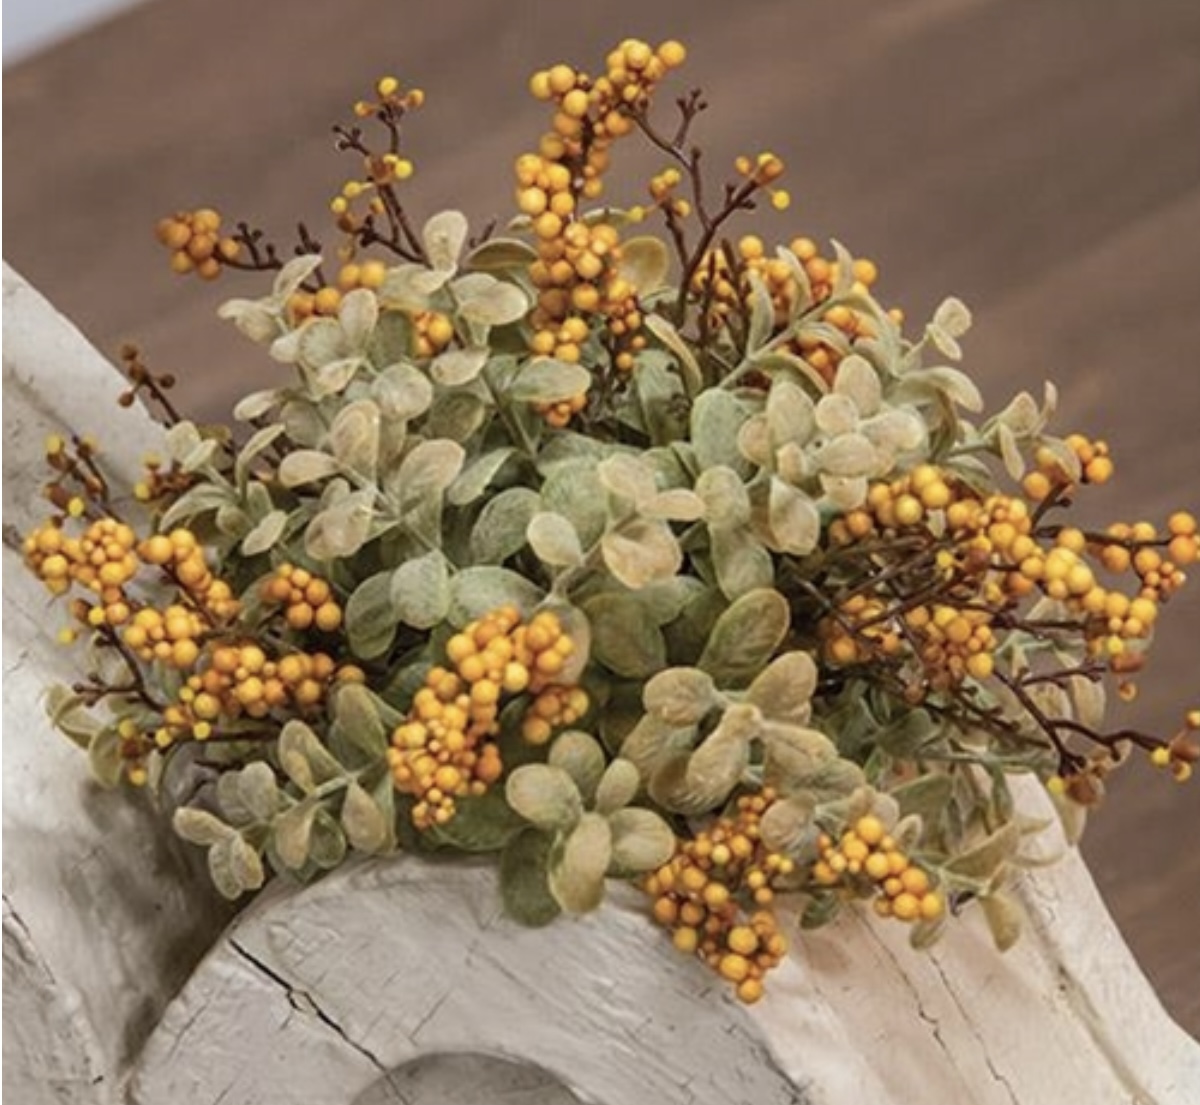 Lend any space a touch of refinement with the Pebble Creek Half Sphere on a flat base. This sphere boosts foam berries in a deep yellow shade perfect for curating autumn looks or for year-round display.  It looks darling in a decorative bowl or atop a shelf and would make a charming centerpiece
Measures 10 inches diameter and about 4 inches high